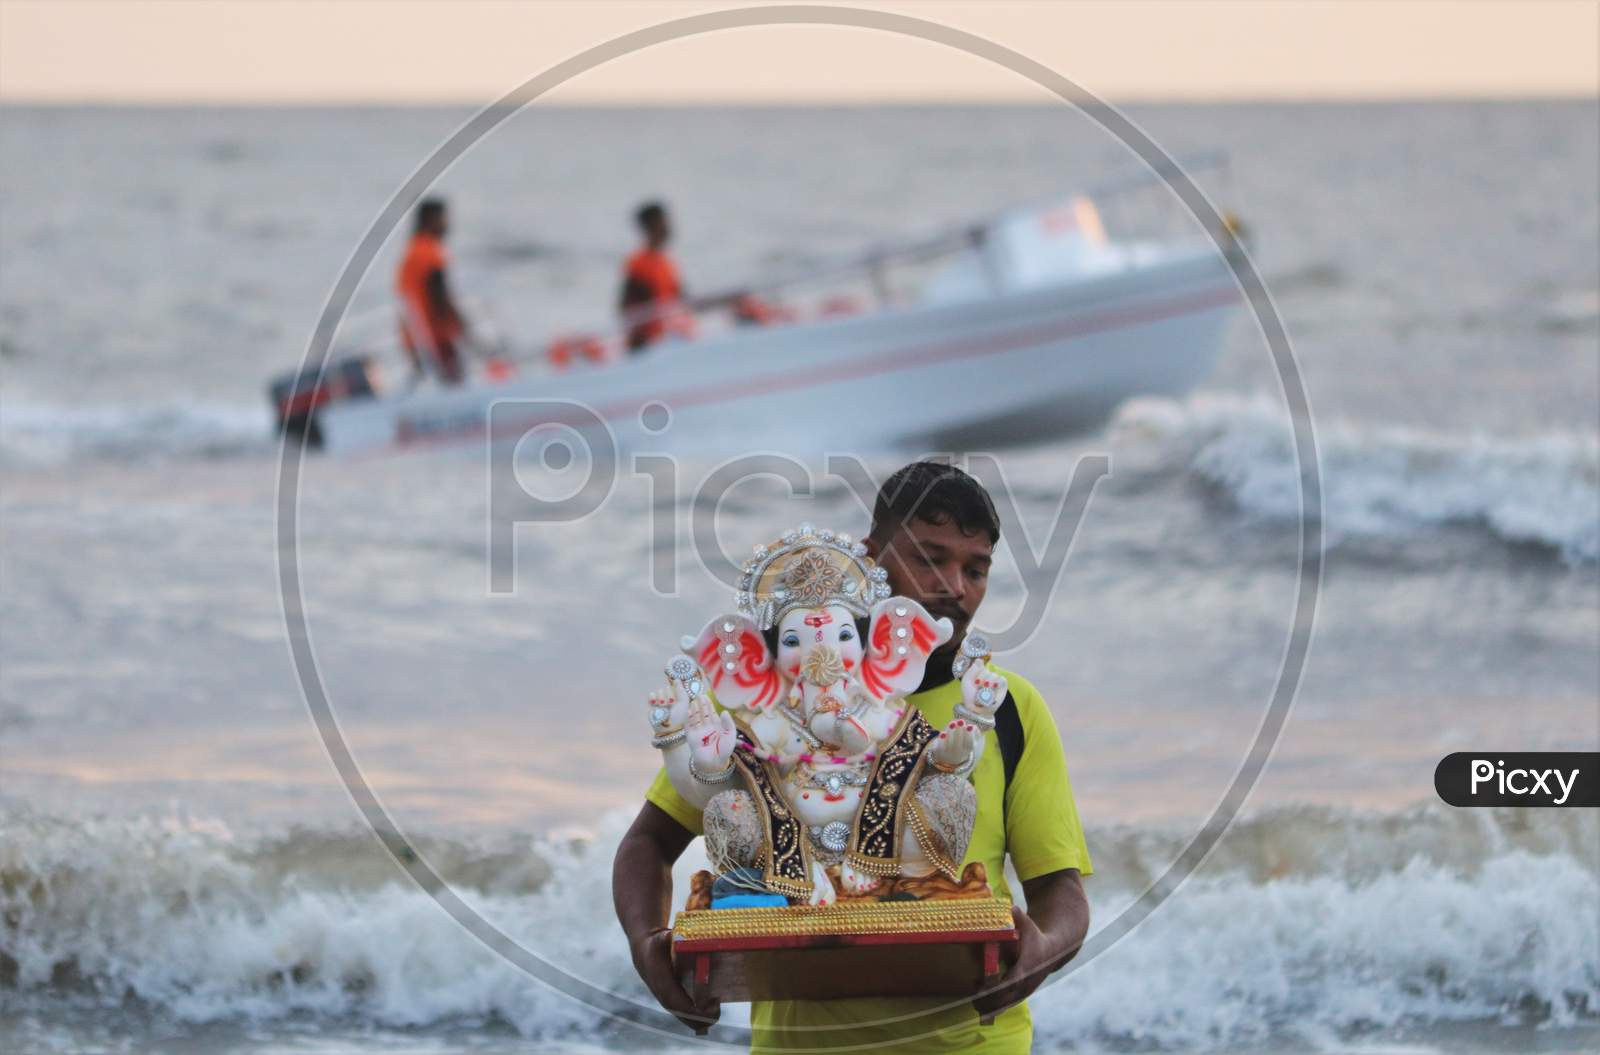 A man carries an idol of the Hindu god Ganesh, the deity of prosperity, to immerse it into the waters of the Arabian sea on the fifth day of the 10-day long Ganesh Chaturthi festival in Mumbai, India on August 26, 2020.